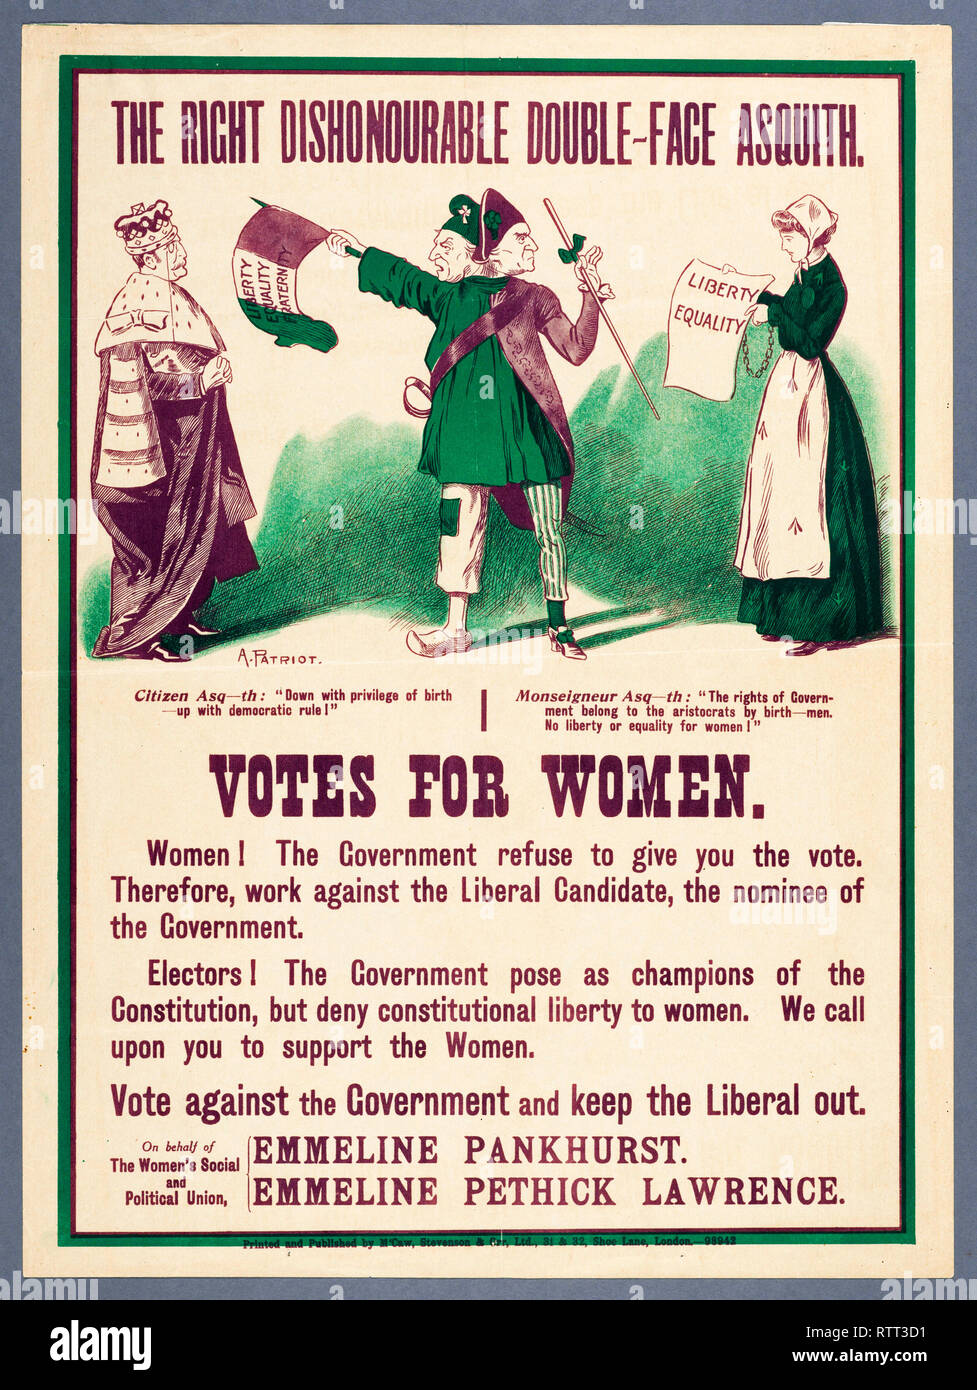 The Right Dishonorable Double-Face Asquith, Votes for Women poster, womens suffrage, c. 1903-1926, UK Stock Photo